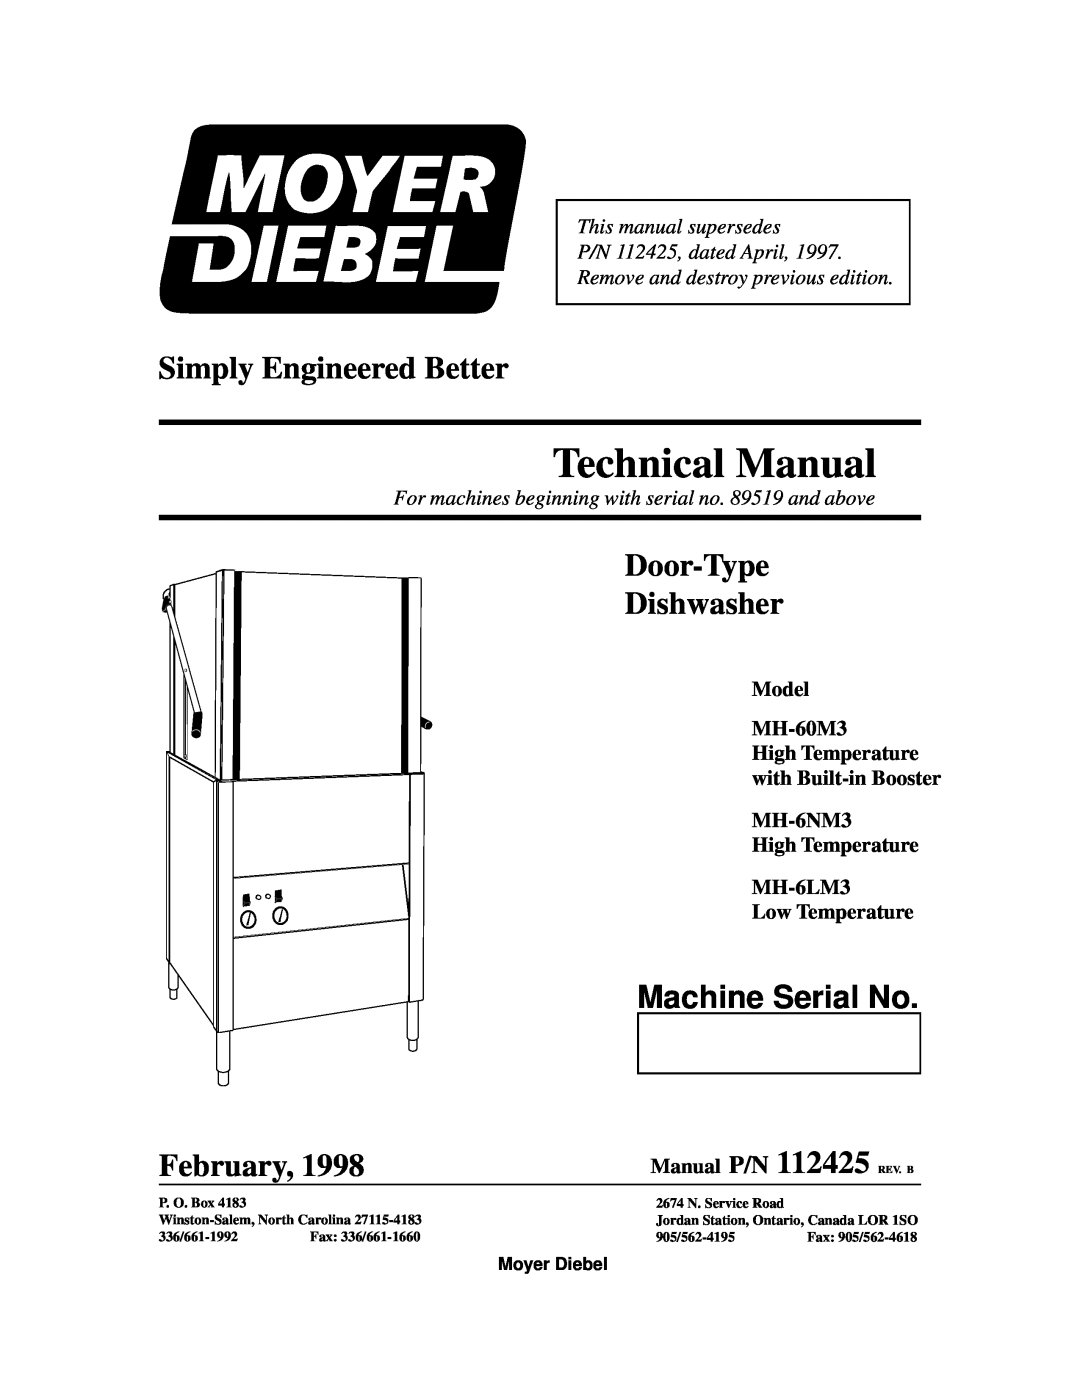 Moyer Diebel MH-6LM3 technical manual Machine Serial No, Model MH-60M3, High Temperature with Built-inBooster MH-6NM3 